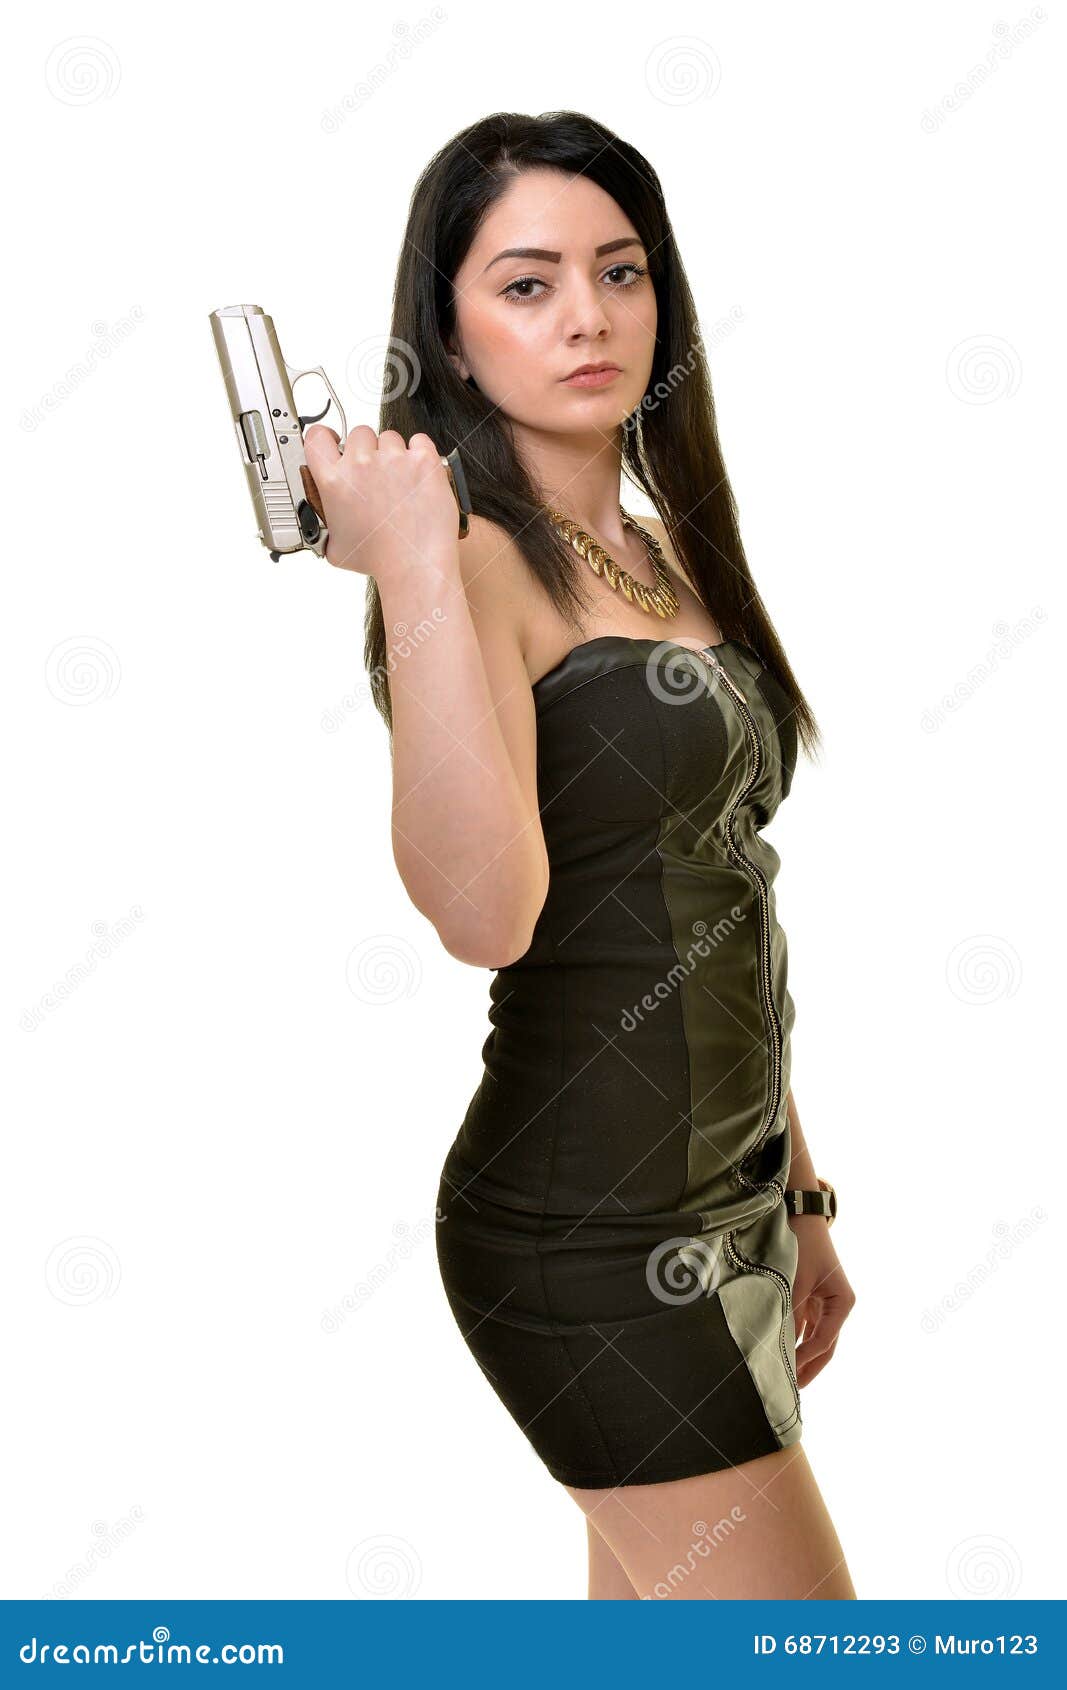 Woman with gun stock image. Image of adult, confrontation - 68712293